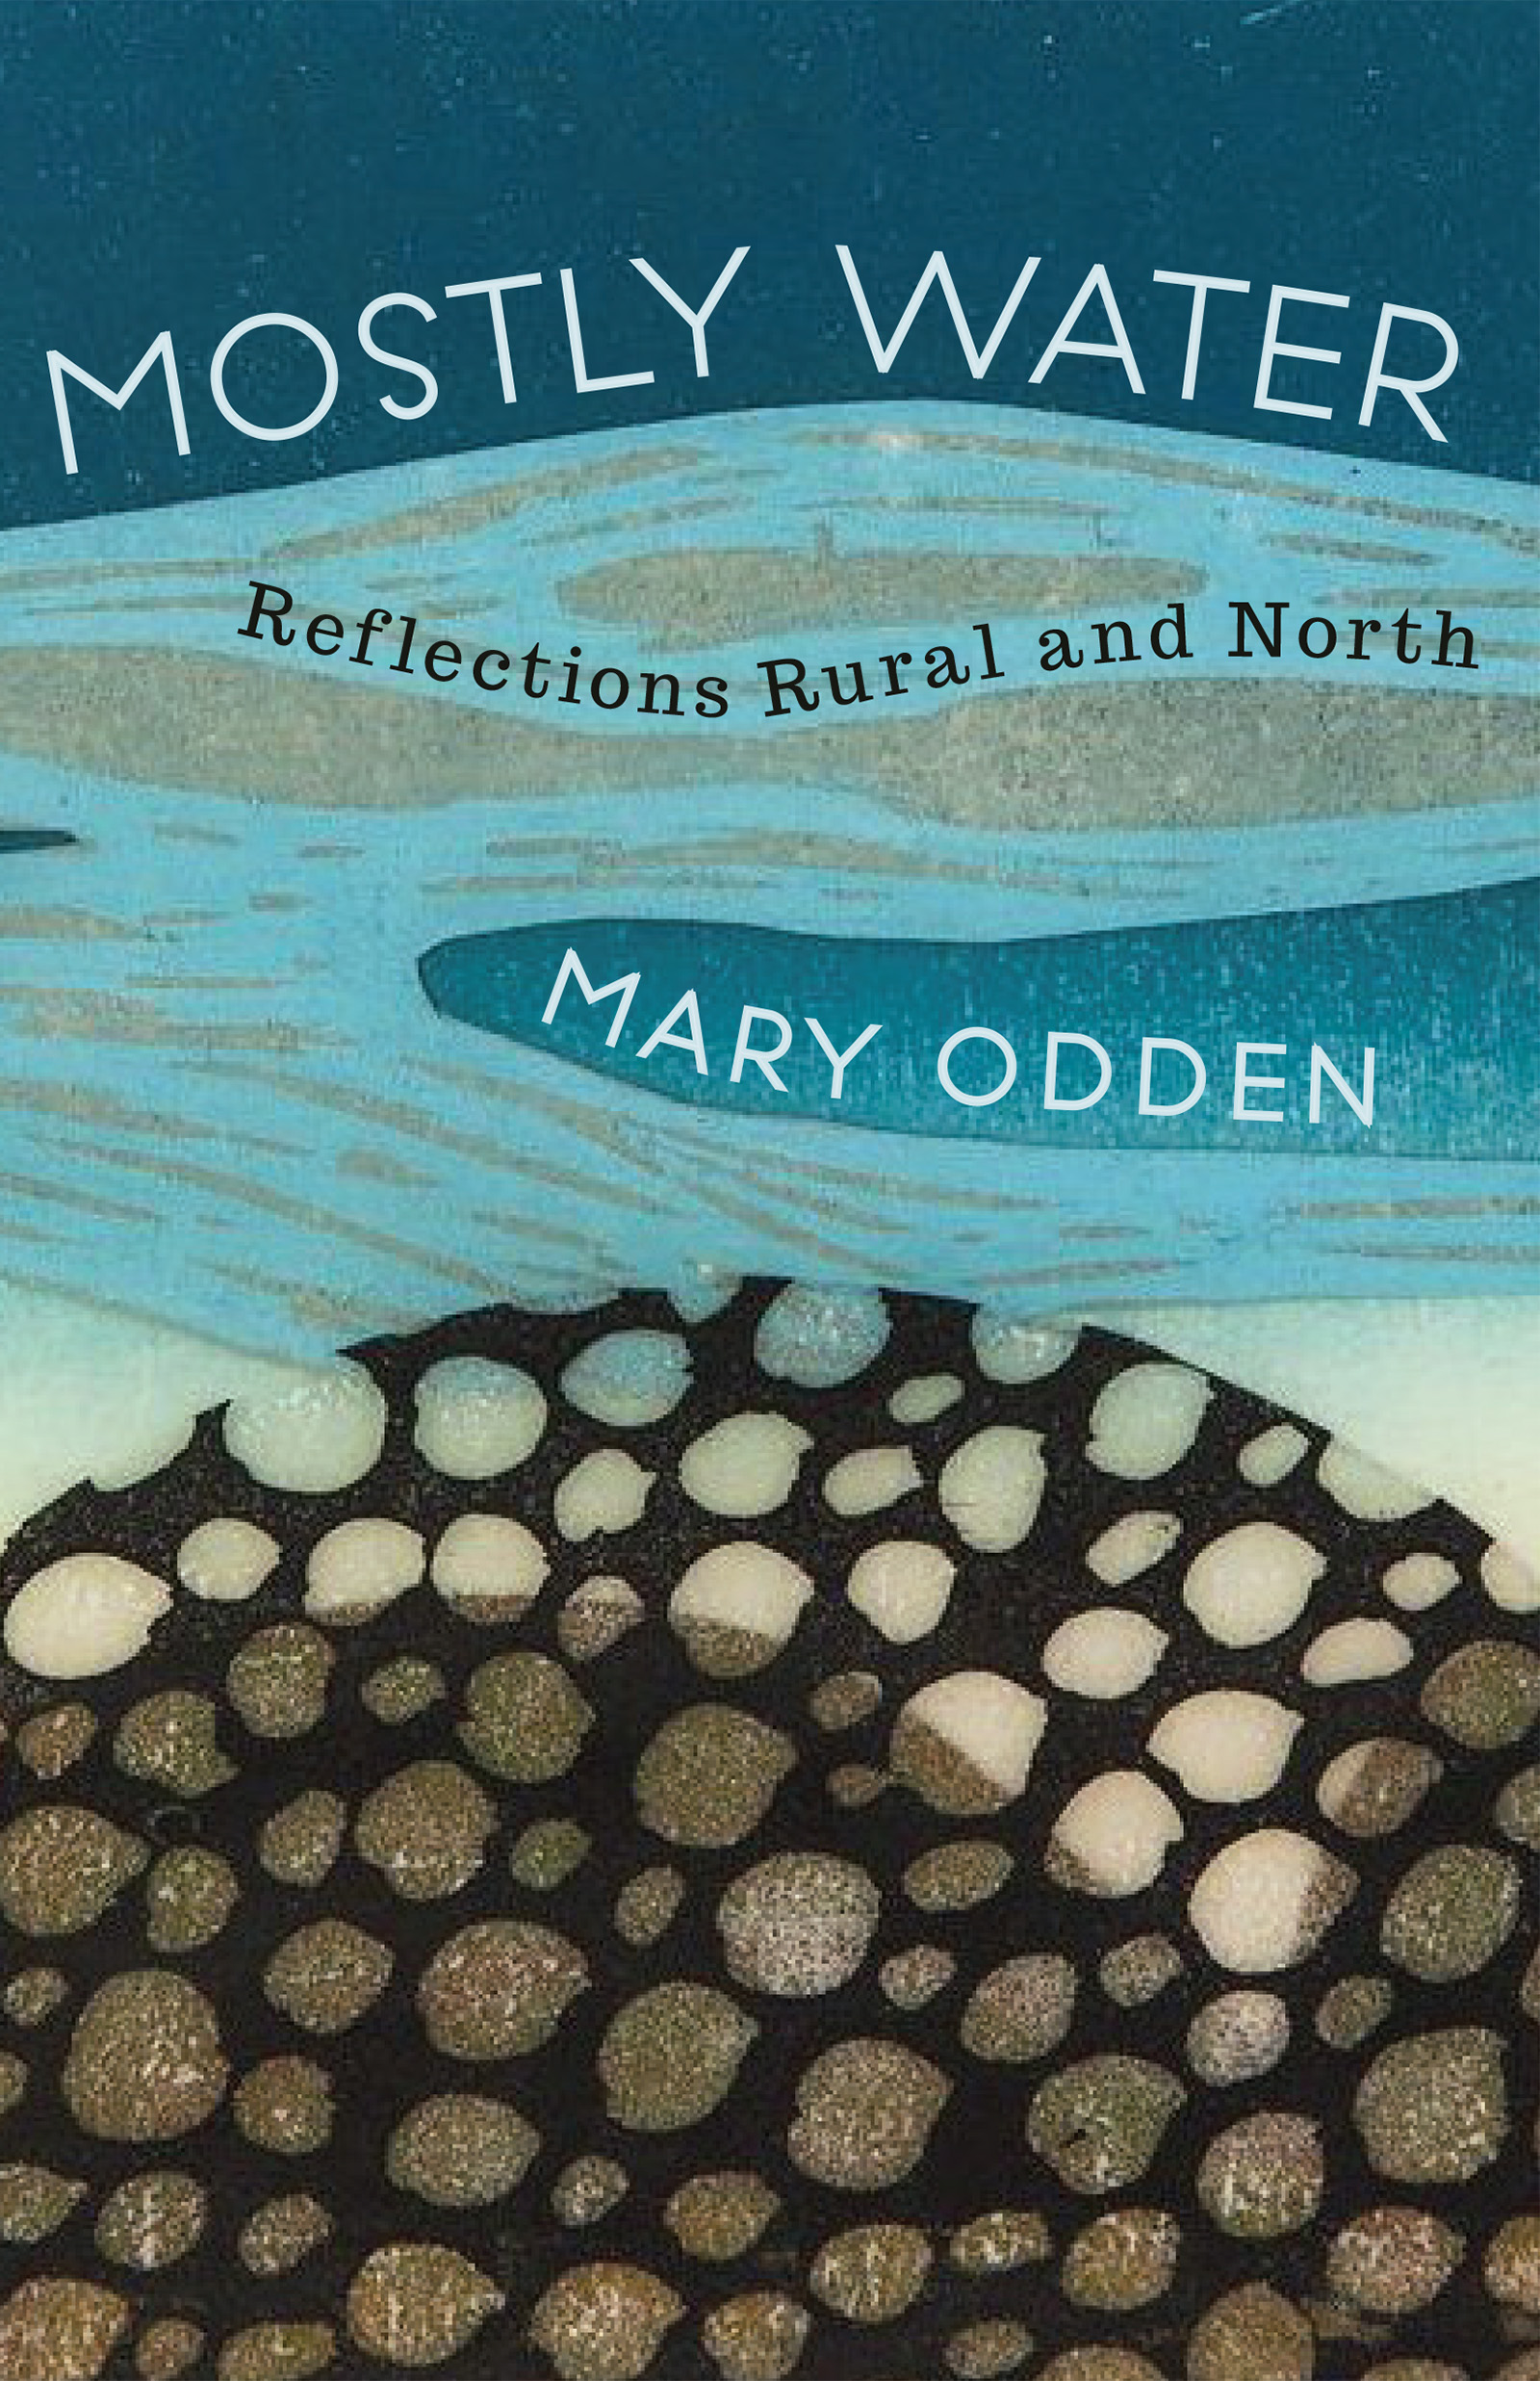 An abstract graphic that resembles the ocean and a rock with white text that reads Mostly Water, Reflections Rural and North by Mary Odden.